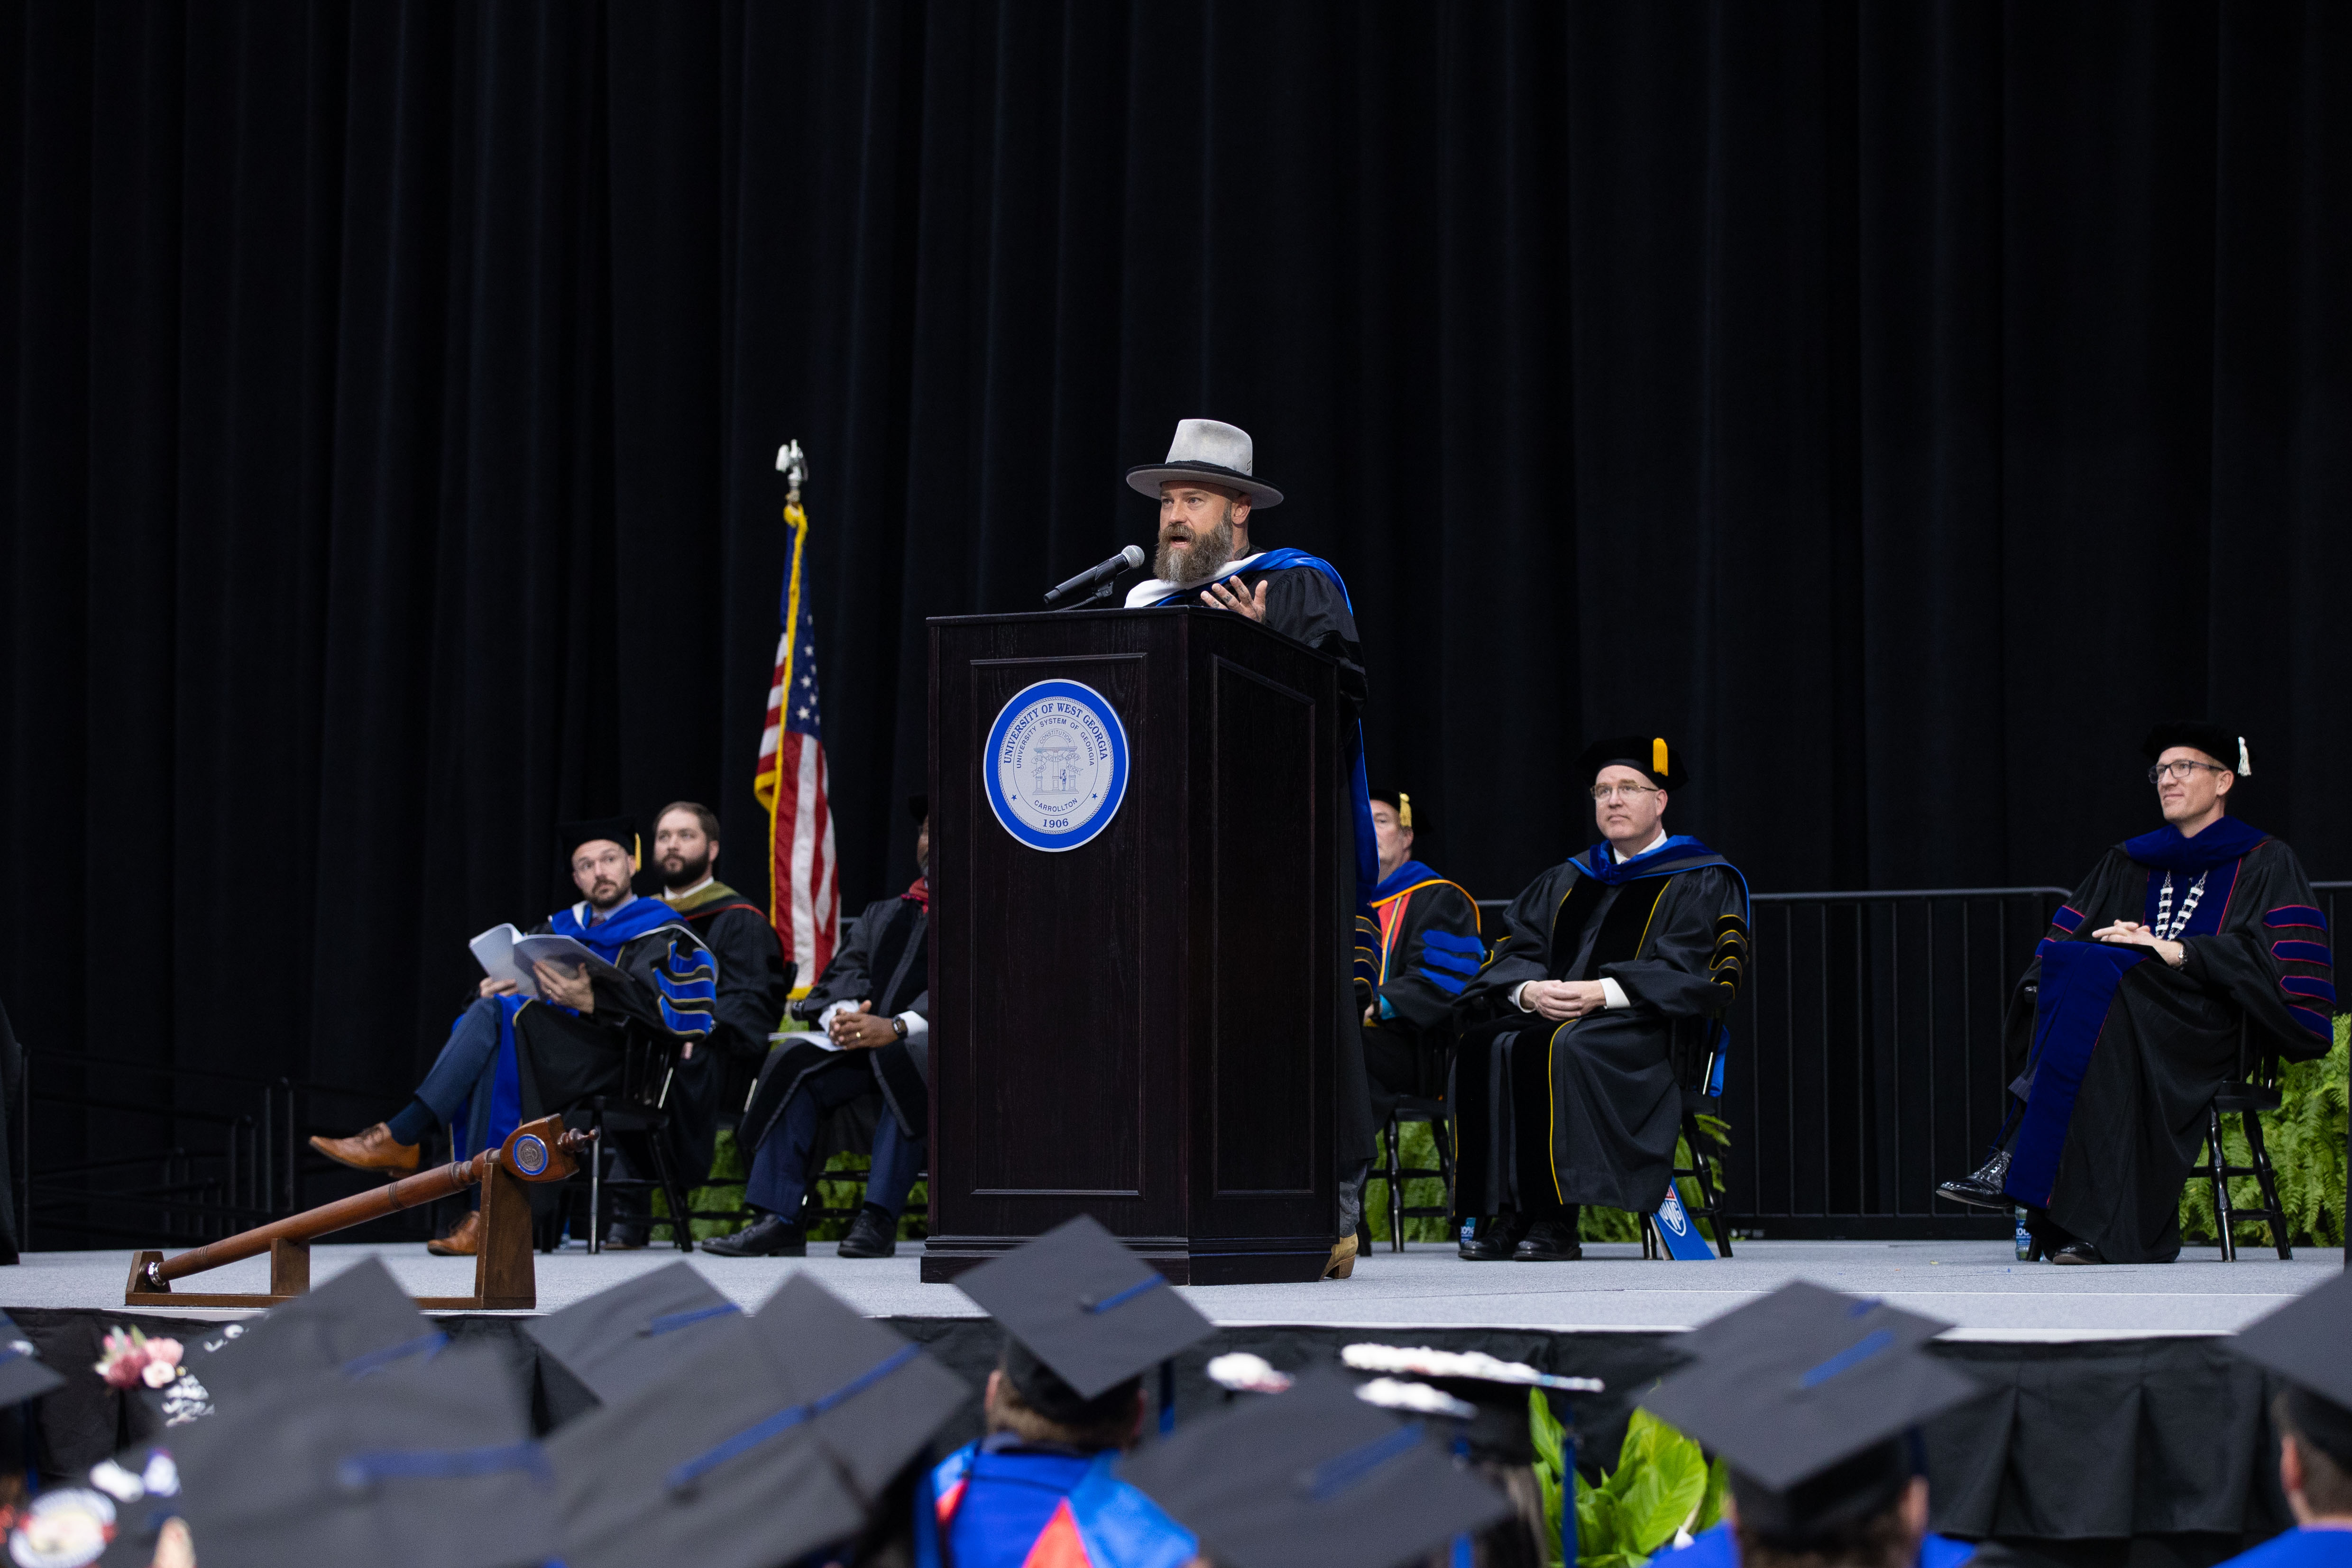 Home Grown: University of West Georgia Awards Honorary Degree to Zac Brown